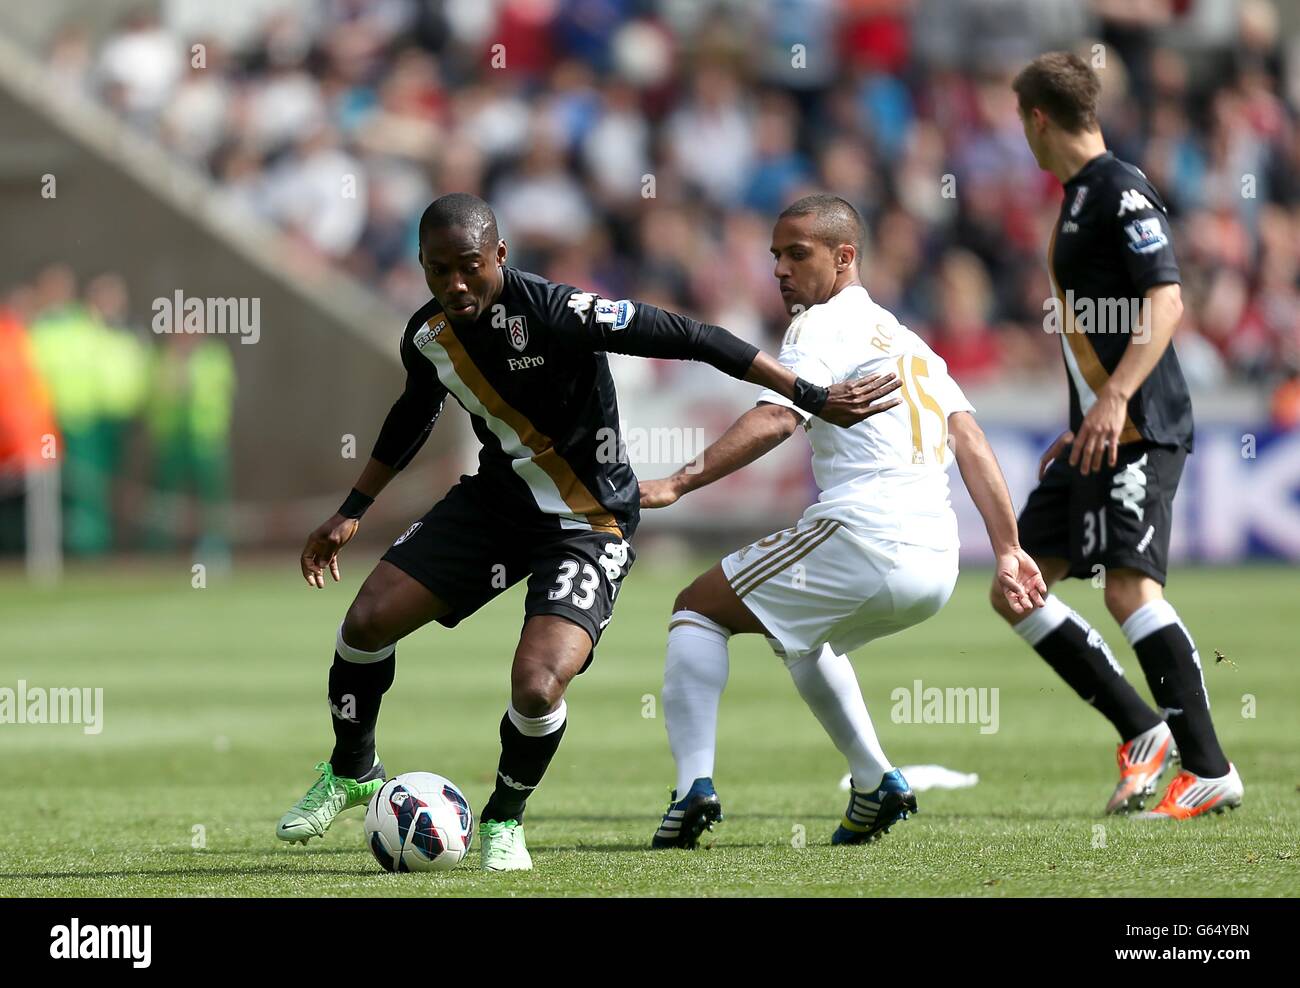 Soccer - Barclays Premier League - Swansea City v Fulham - Liberty Stadium. Fulham's Eyong Enoh (left) and Swansea City's Wayne Routledge (right) battle for the ball Stock Photo